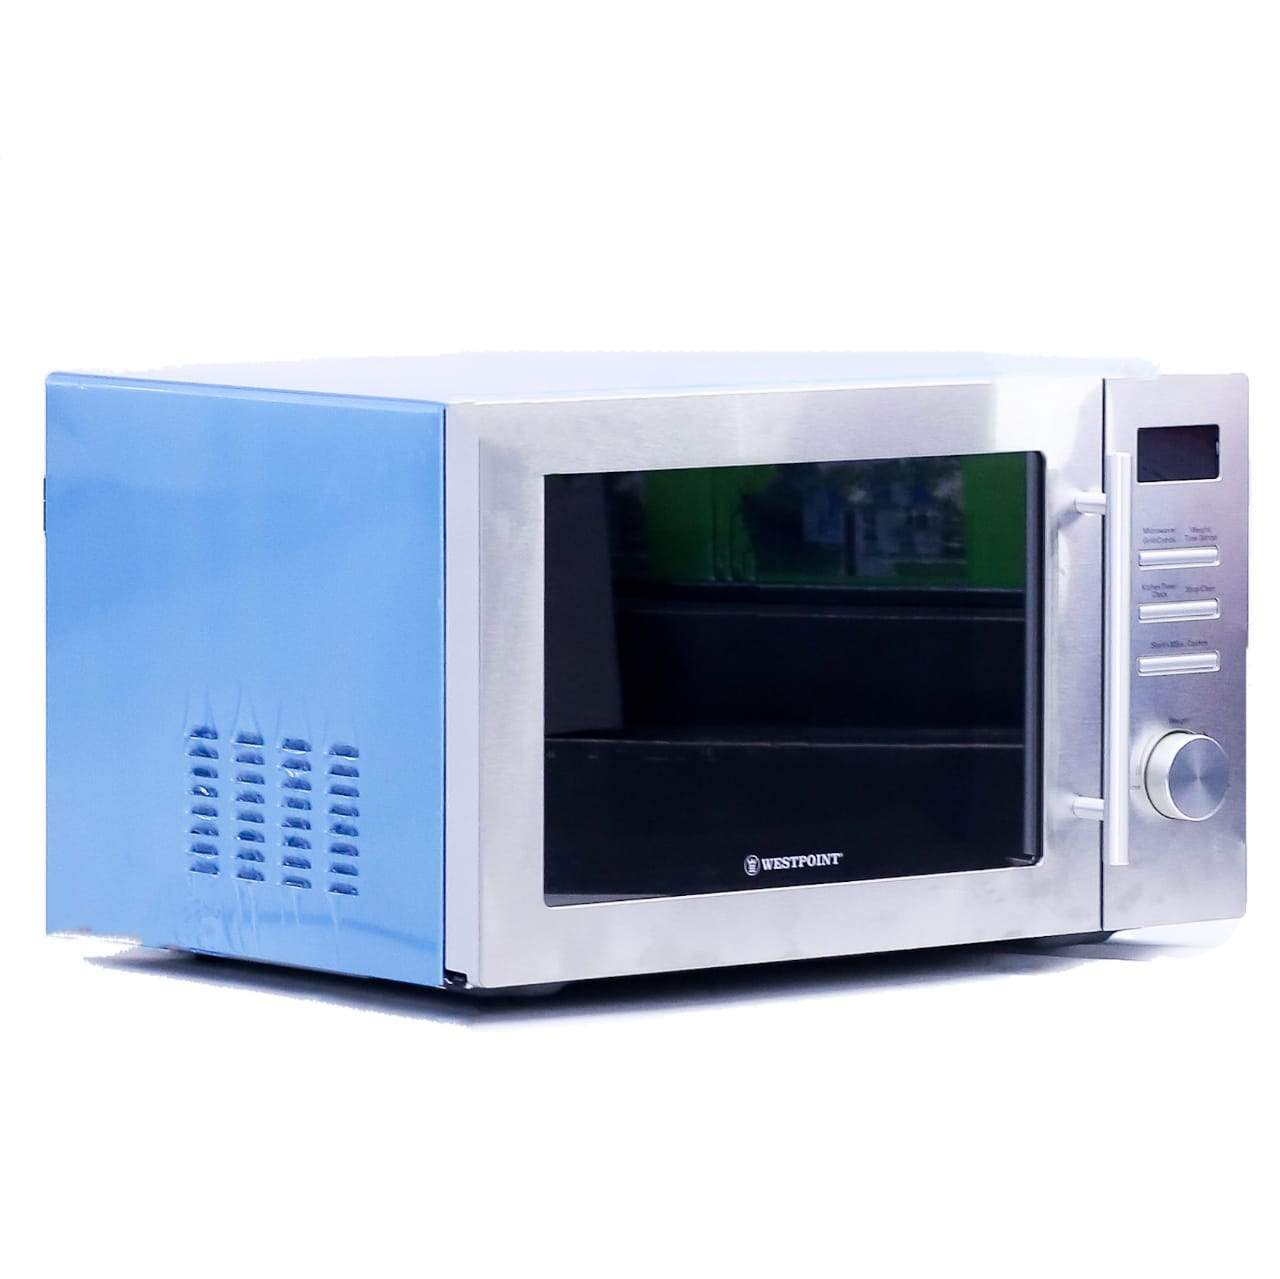 WEST POINT MICROWAVE OVEN 854